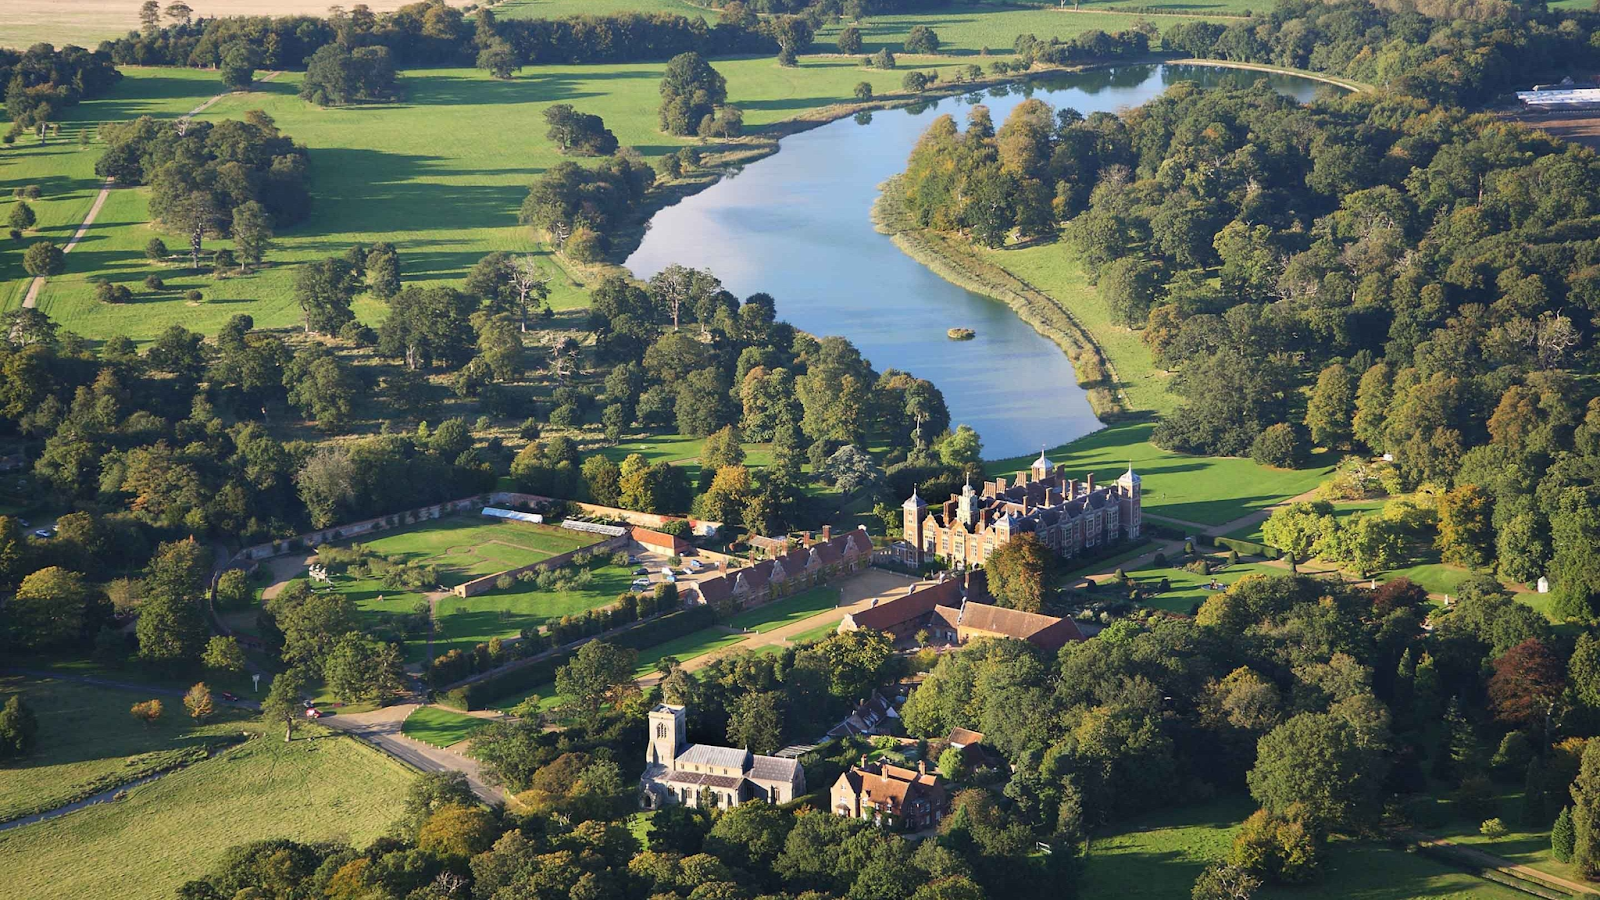 An image showing the Blickling Estate, a National Trust site